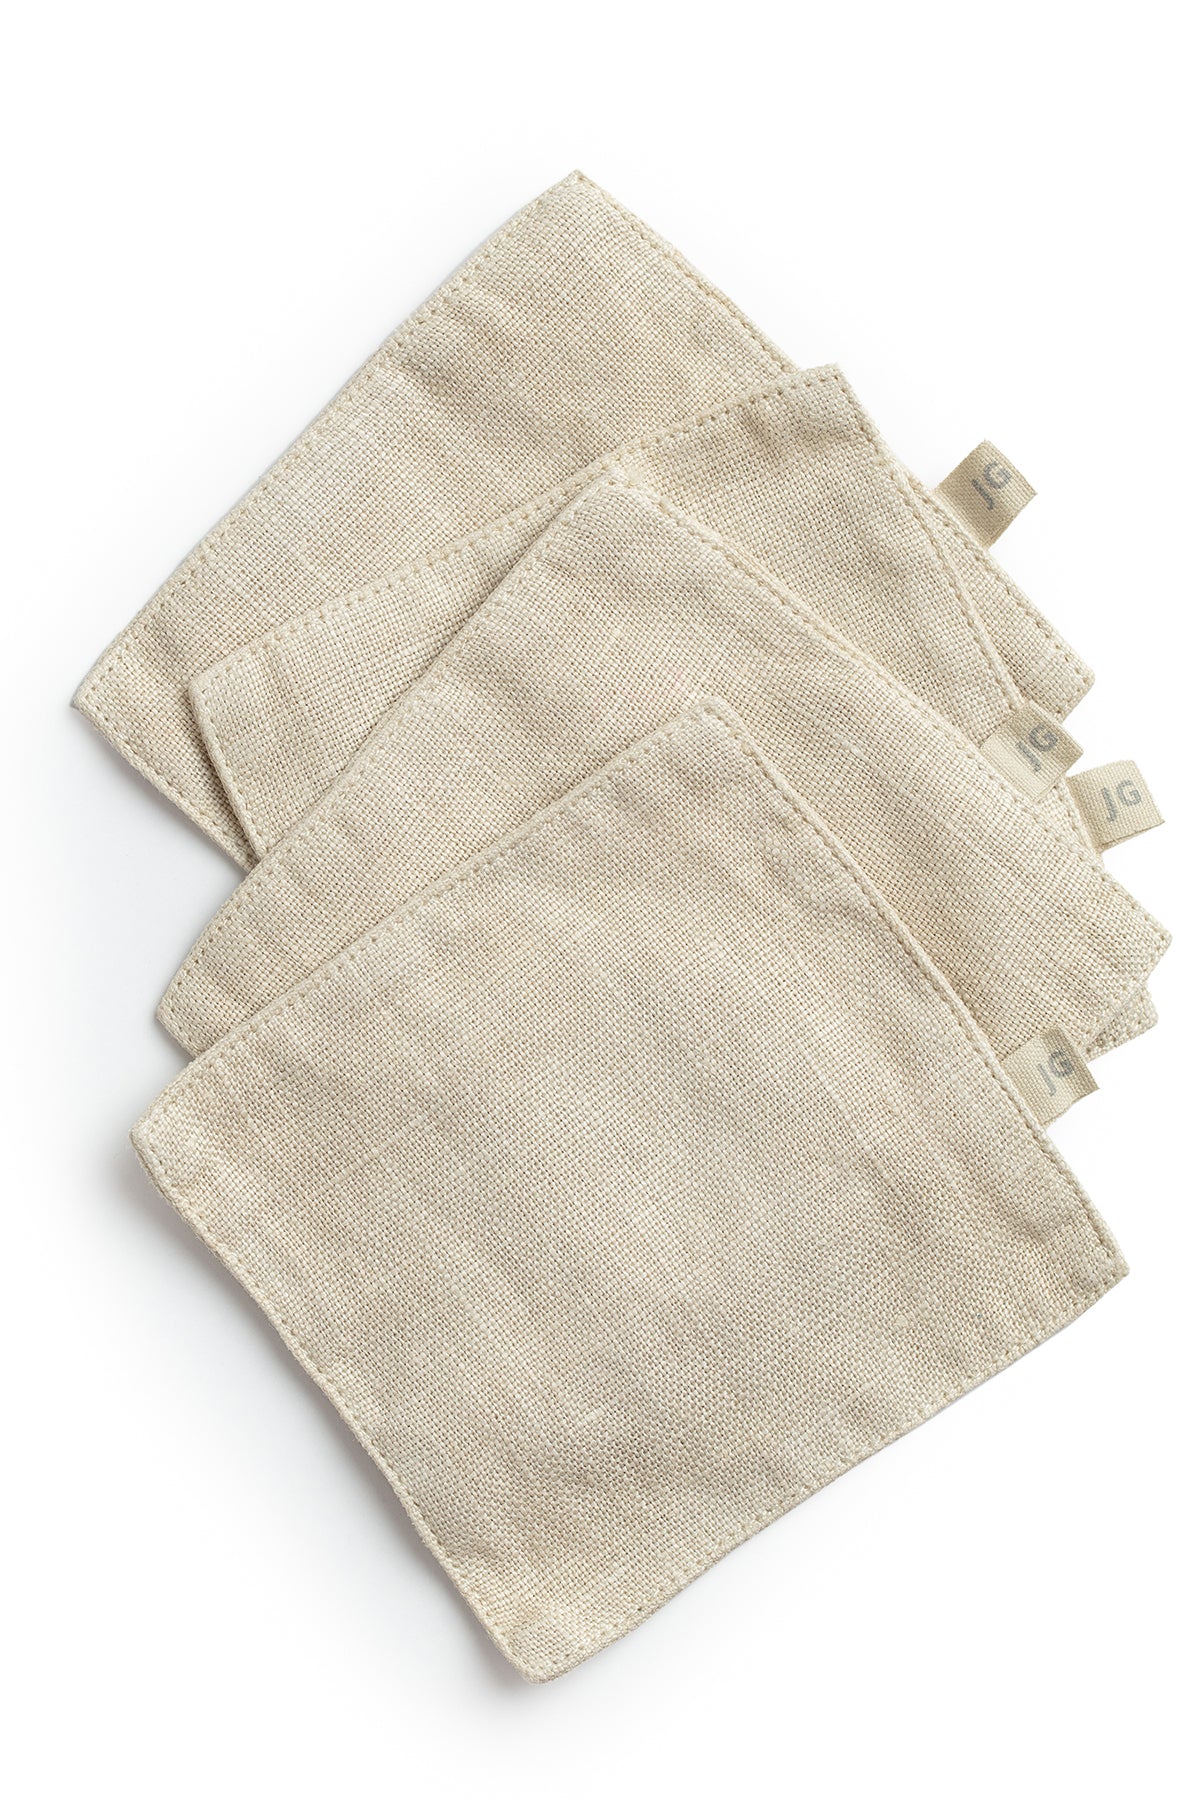 A set of four Jenny Graham Home Linen Coasters on a white surface.-15073230651585